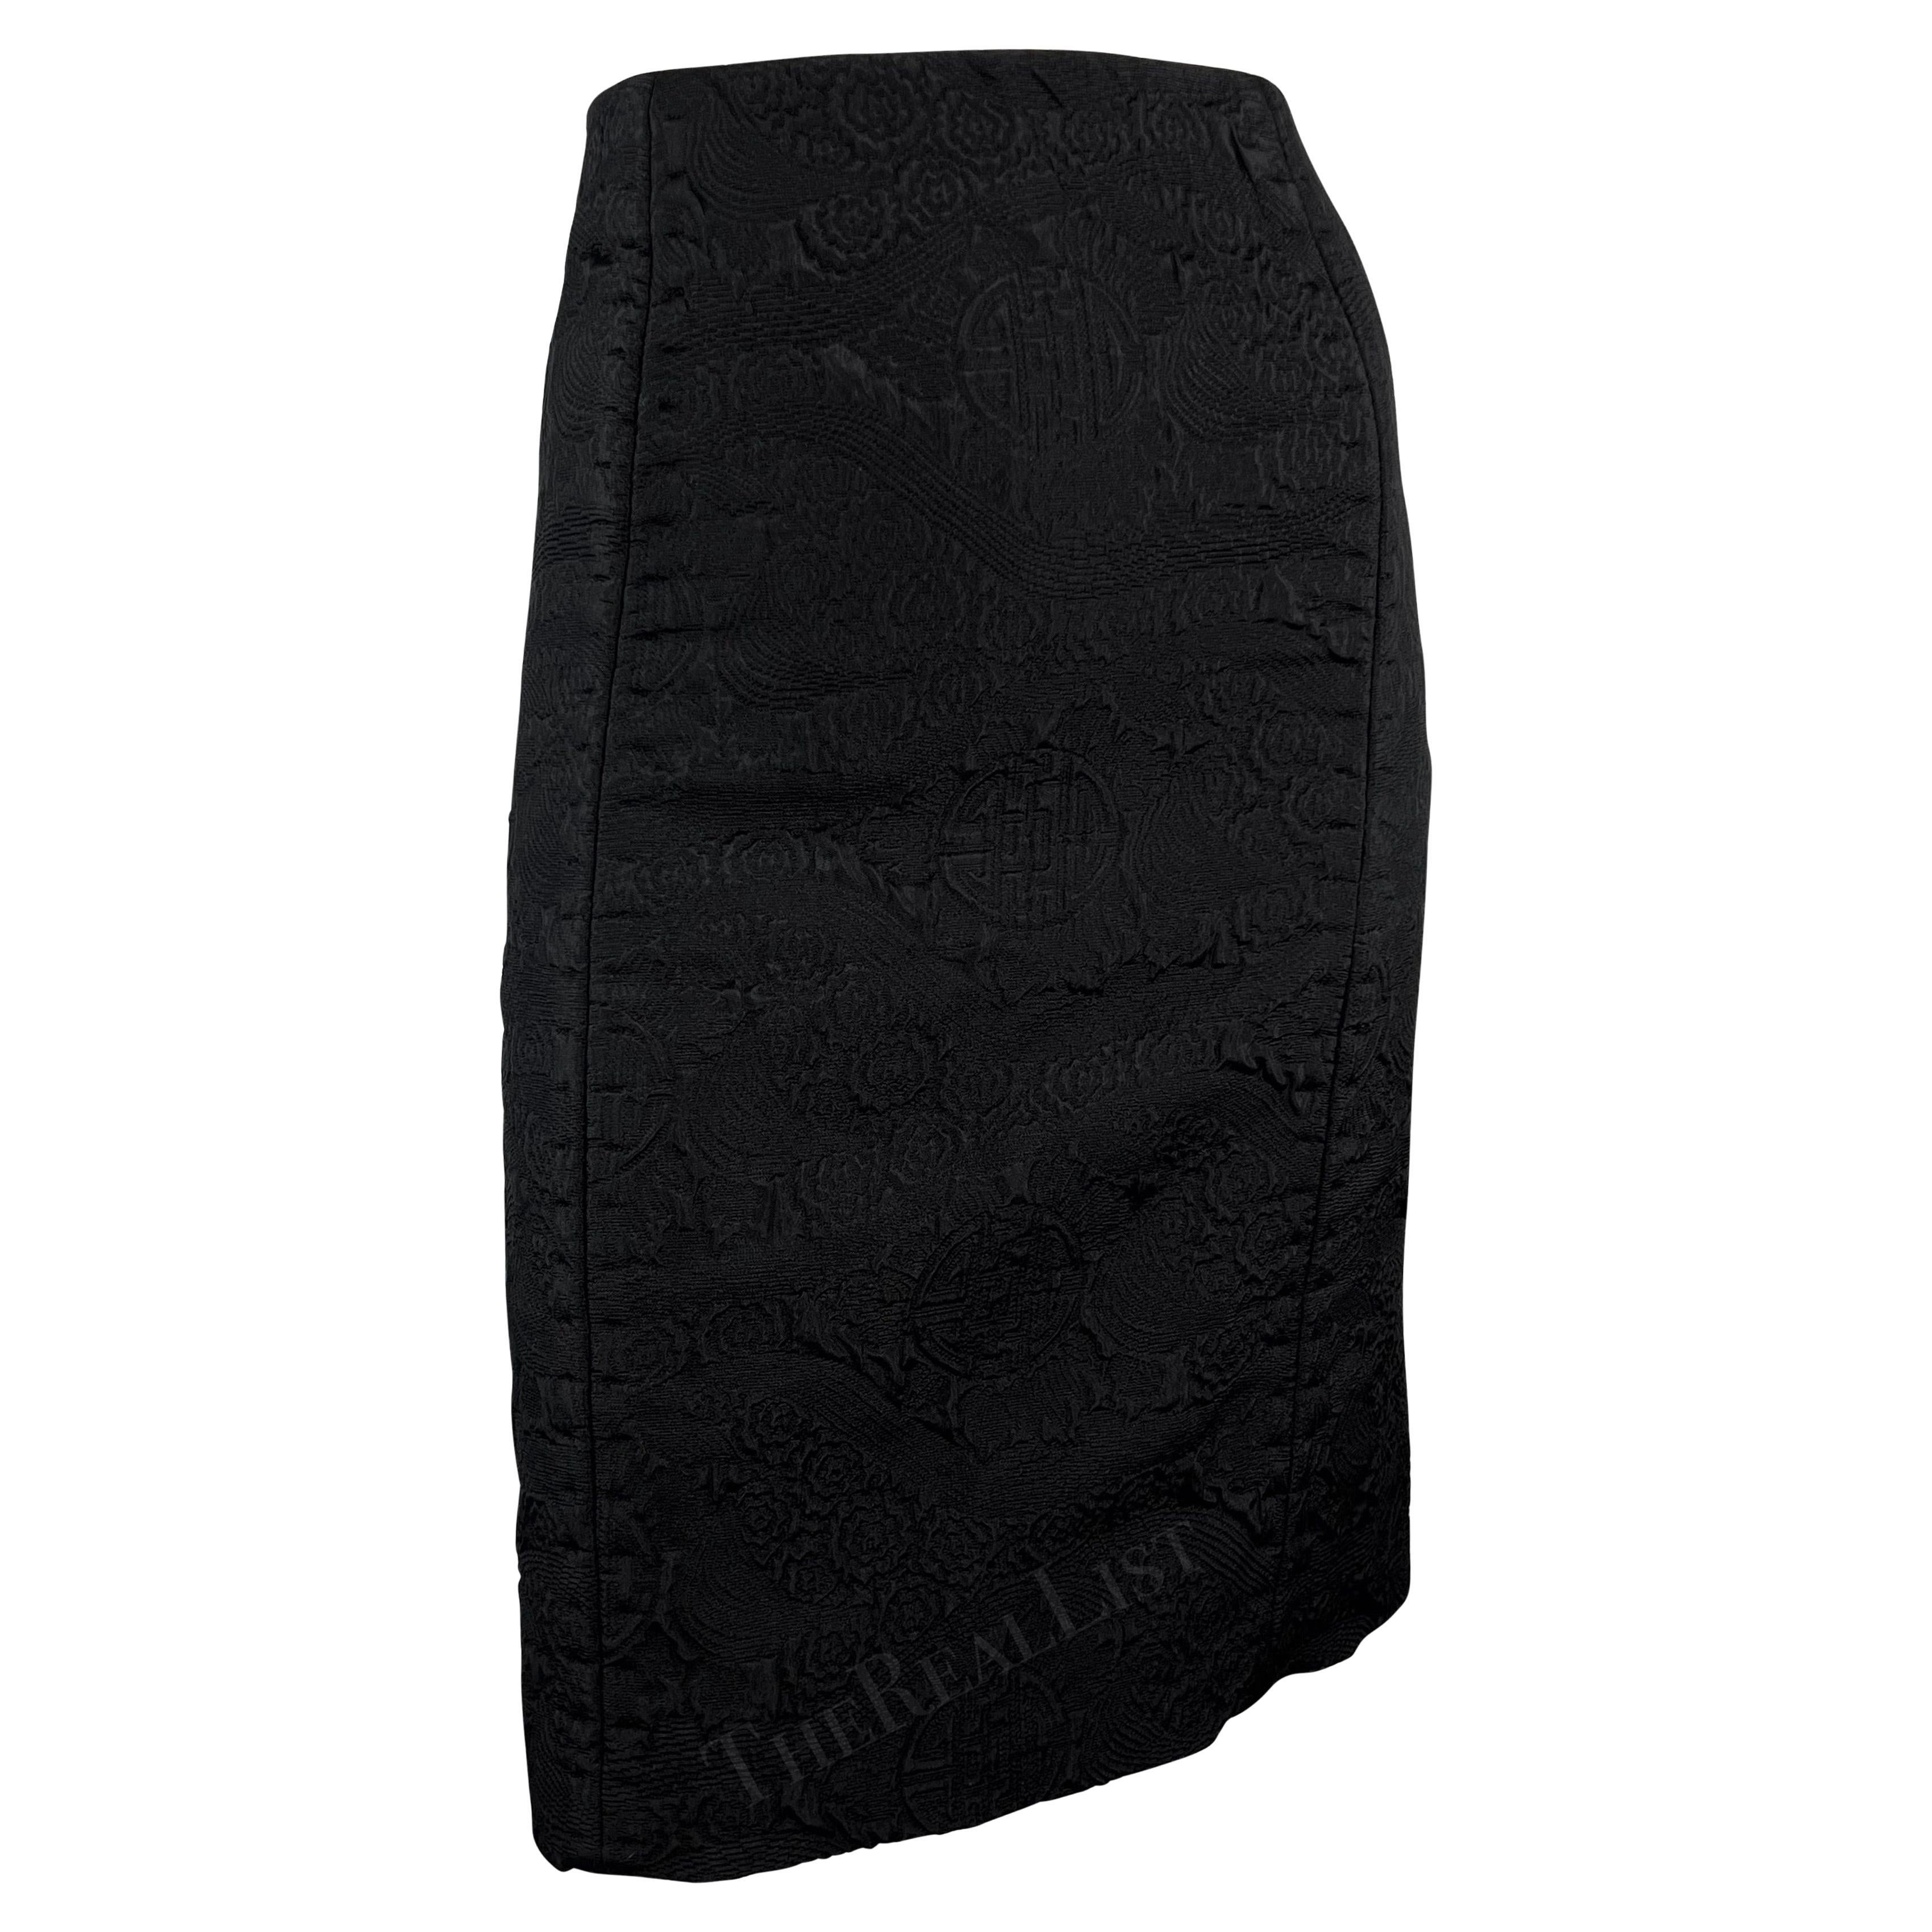 F/W 2004 Yves Saint Laurent by Tom Ford Chinoiserie Brocade Black Skirt For Sale